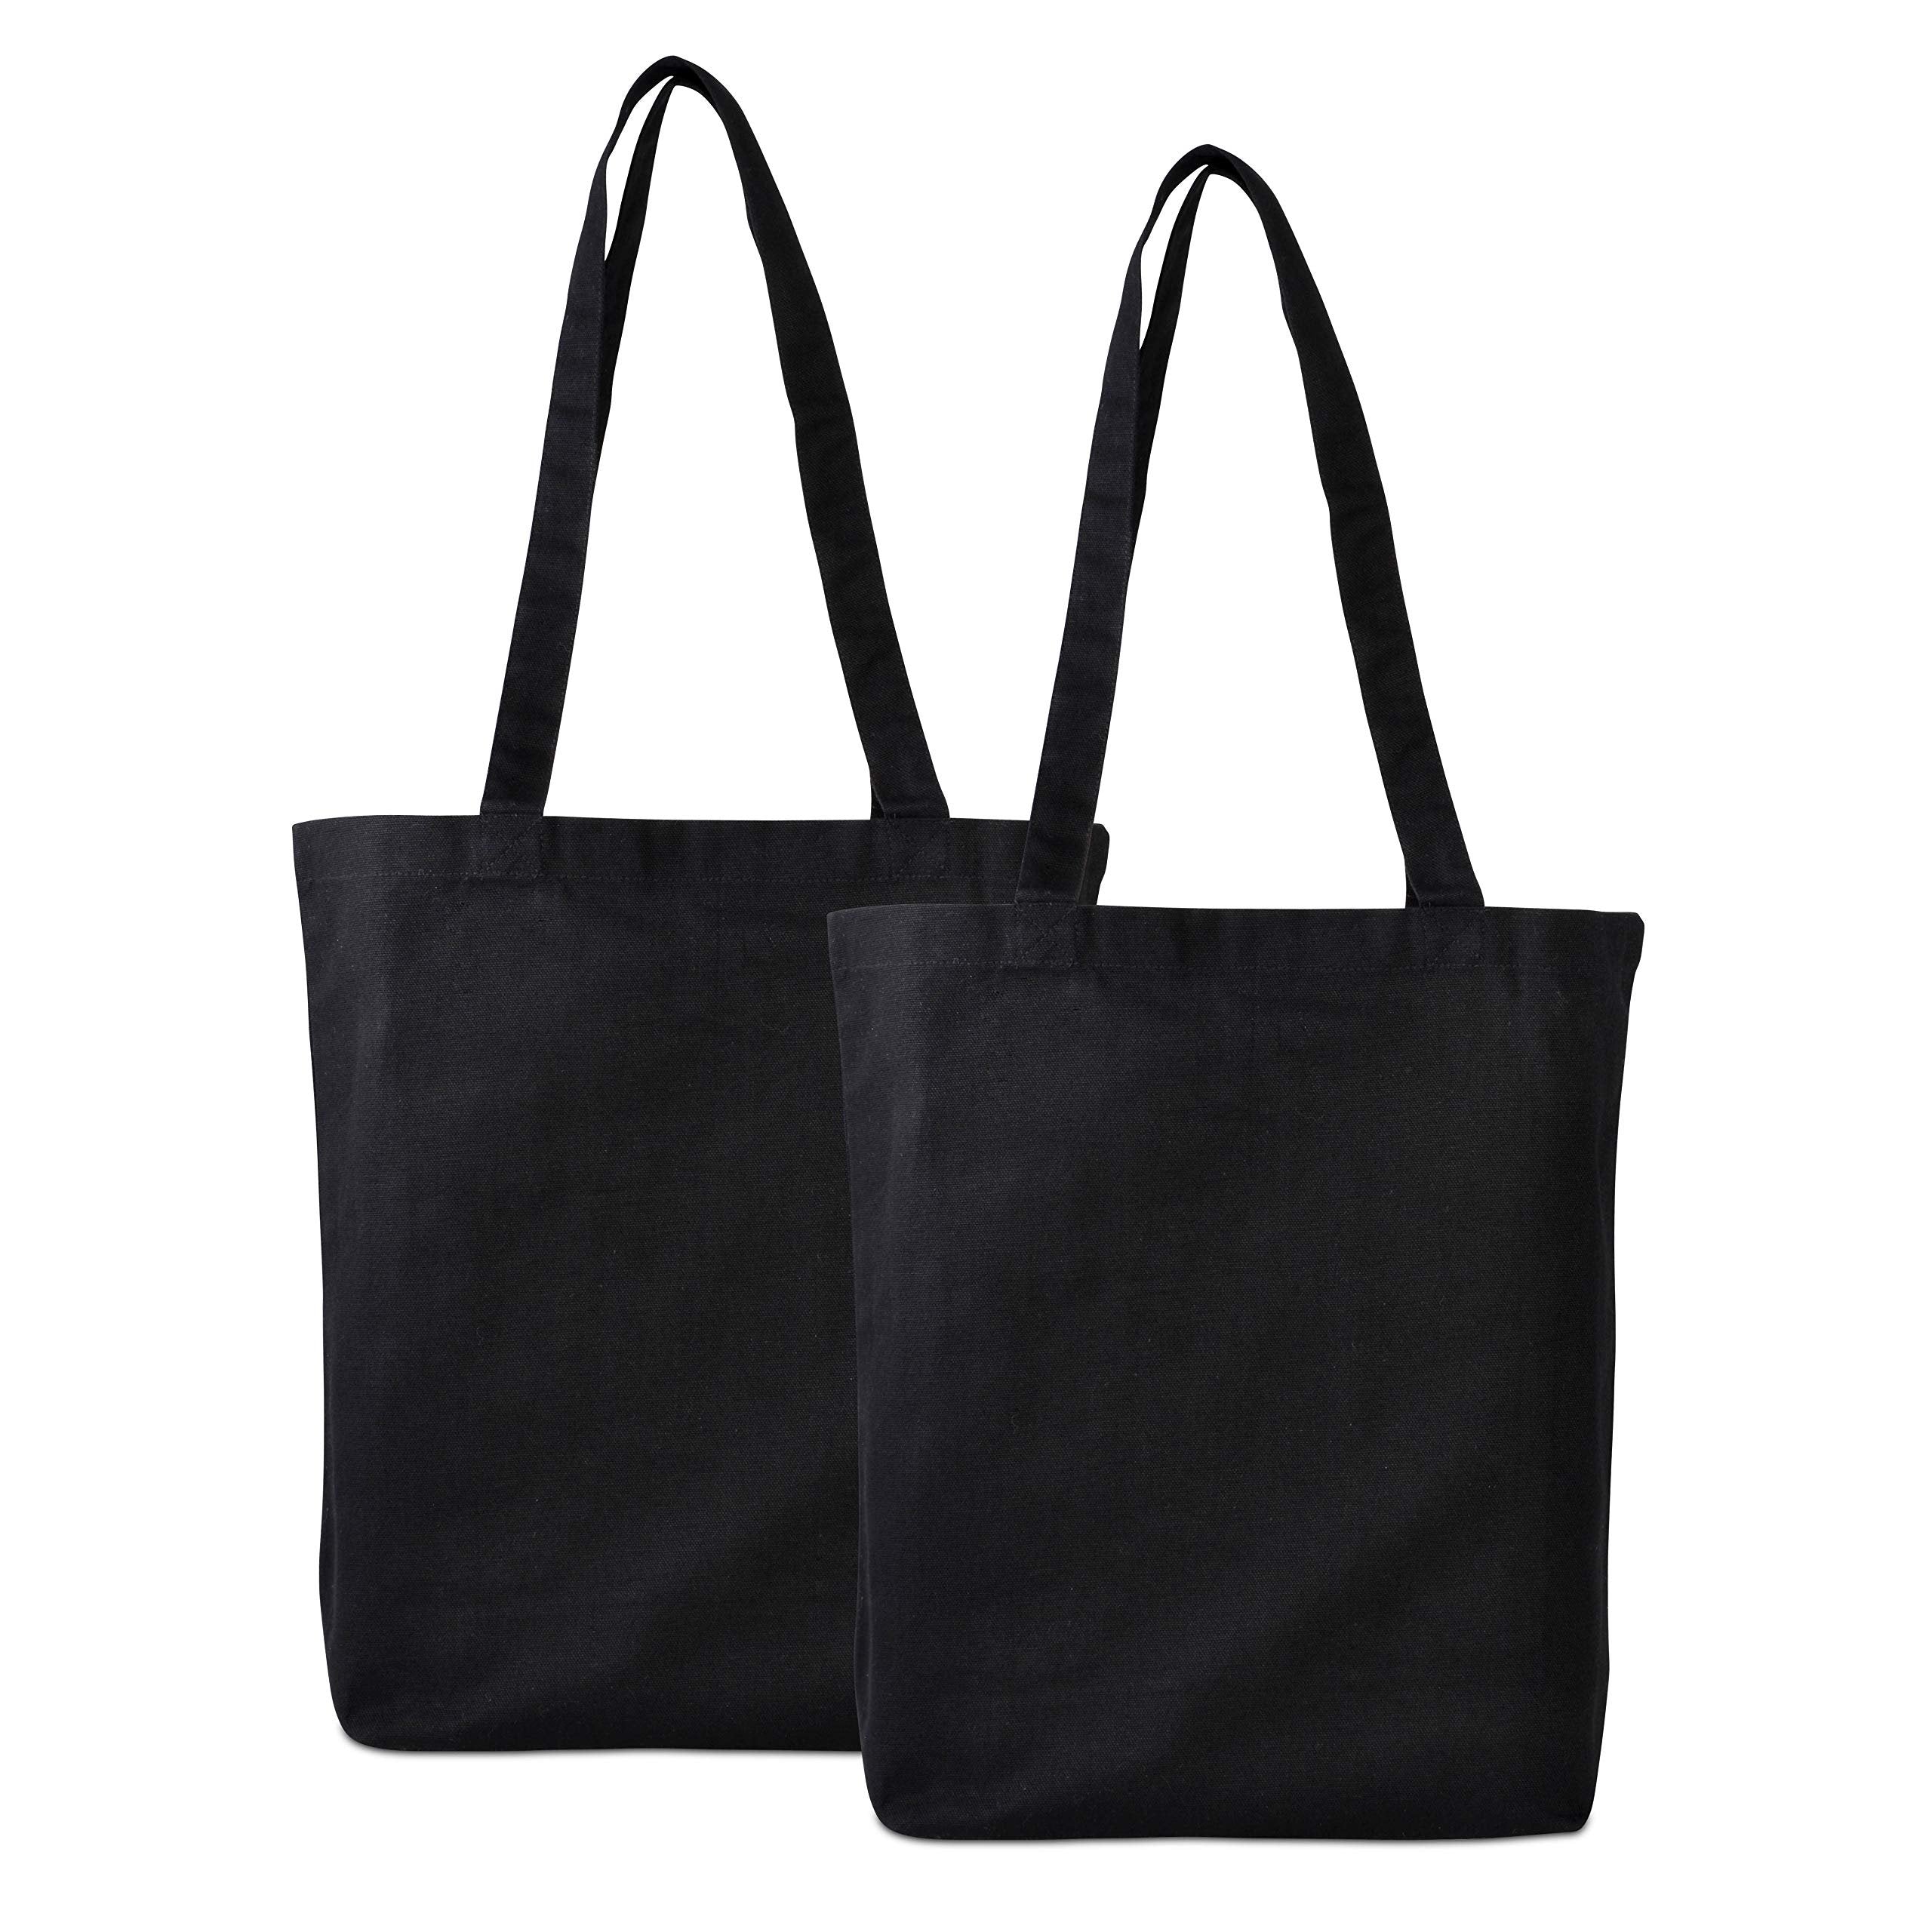 2 Pack Black Canvas Tote Bags 16x16x5 - Shoulder Length Handles, Reusable Muslin Cloth for Crafting, Business, and Gifts